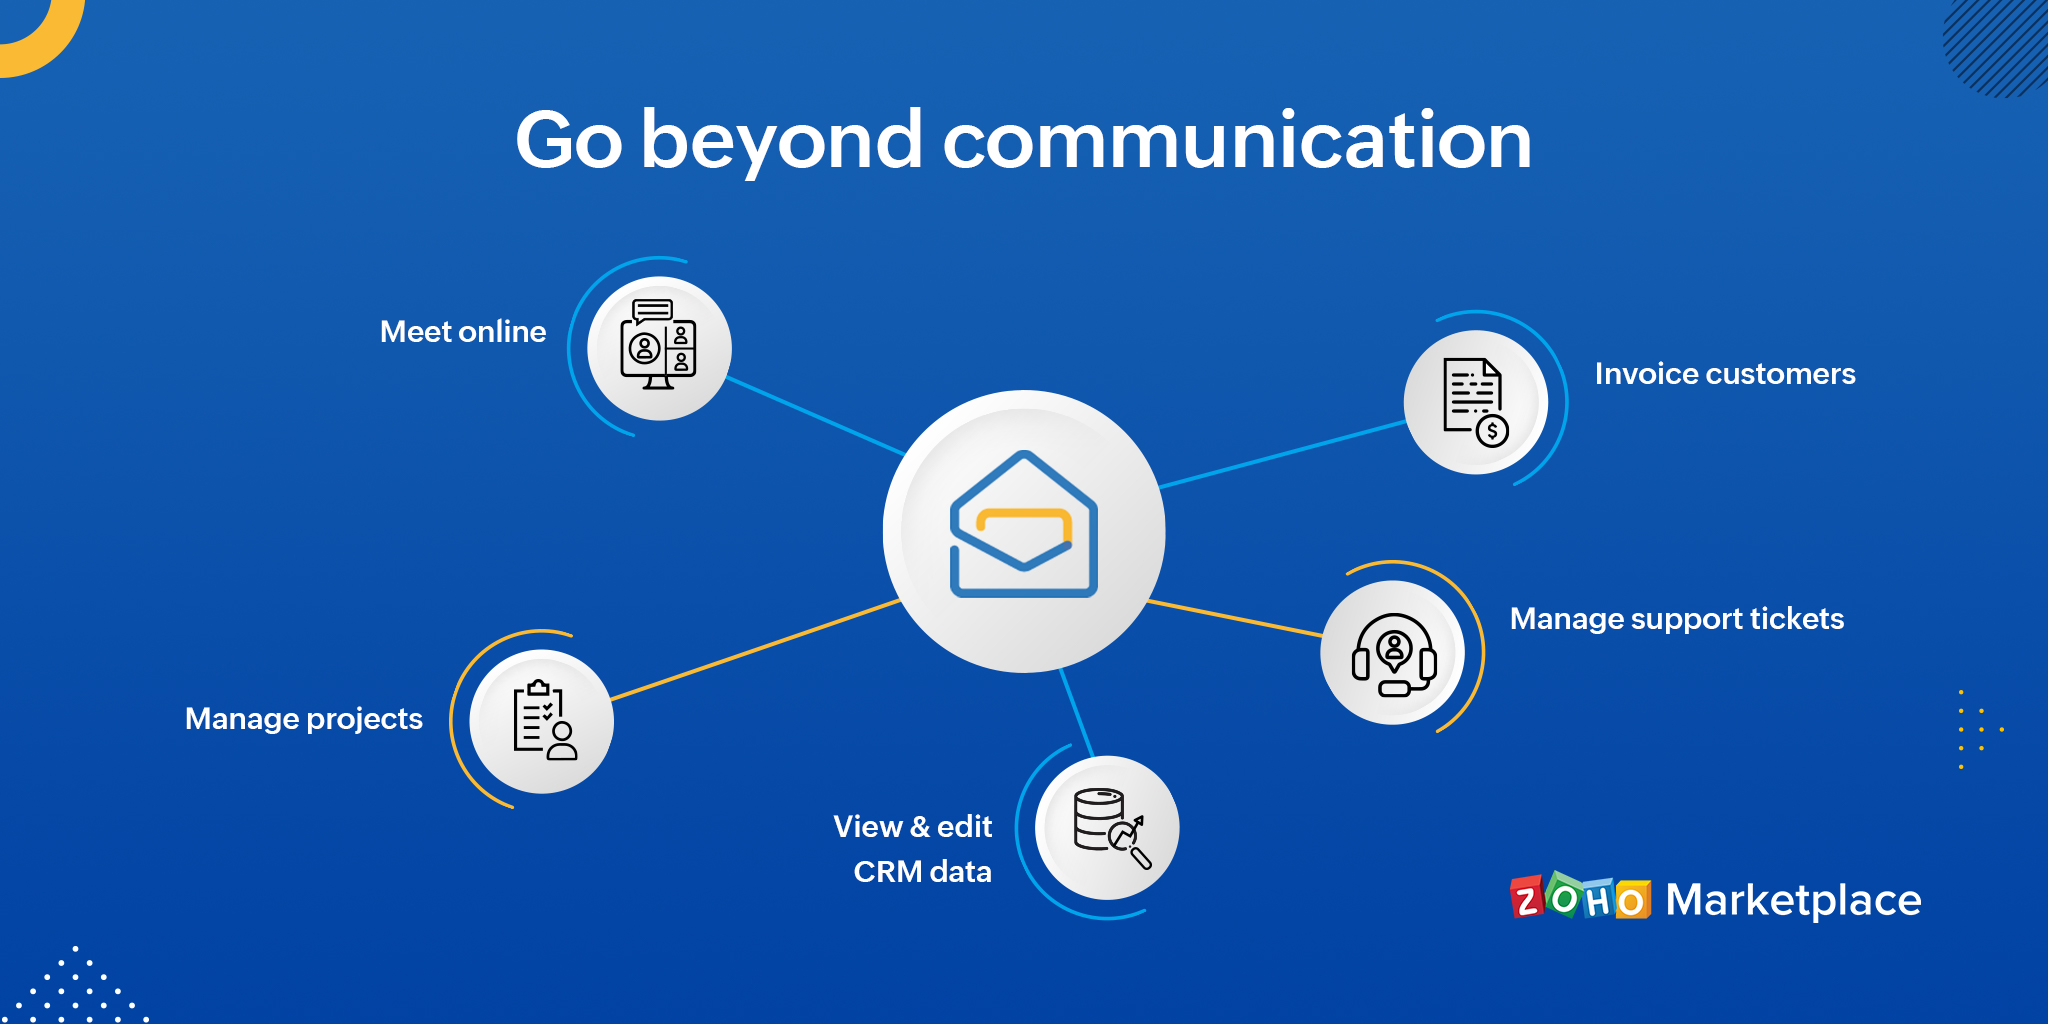 Beyond communication: Here are 5 other things you can do from your email